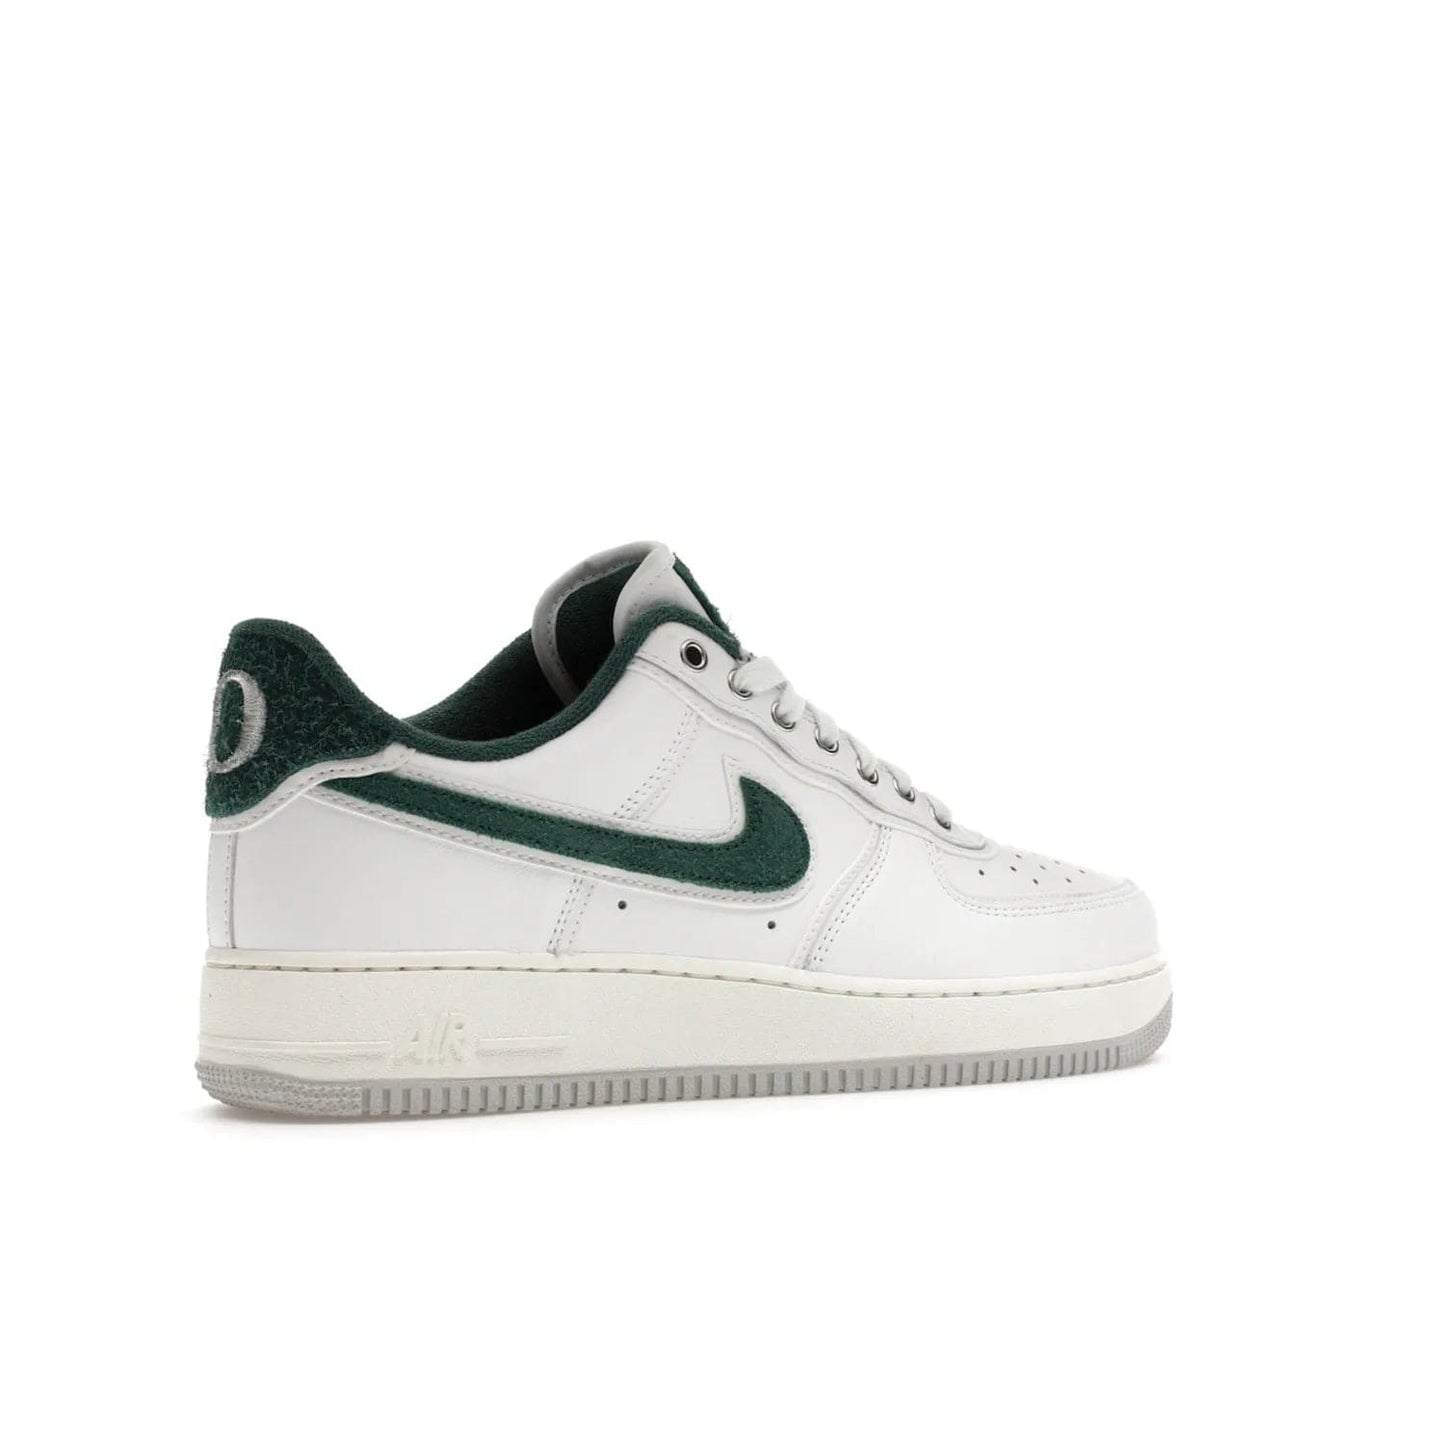 Nike Air Force 1 Low '07 Premium University of Oregon PE - Image 34 - Only at www.BallersClubKickz.com - The Nike Air Force 1 Low '07 Premium. Special Oregon University colorway. White base with green and sail accents. Cushioned rubber midsole. Comfort and style. Support your school!